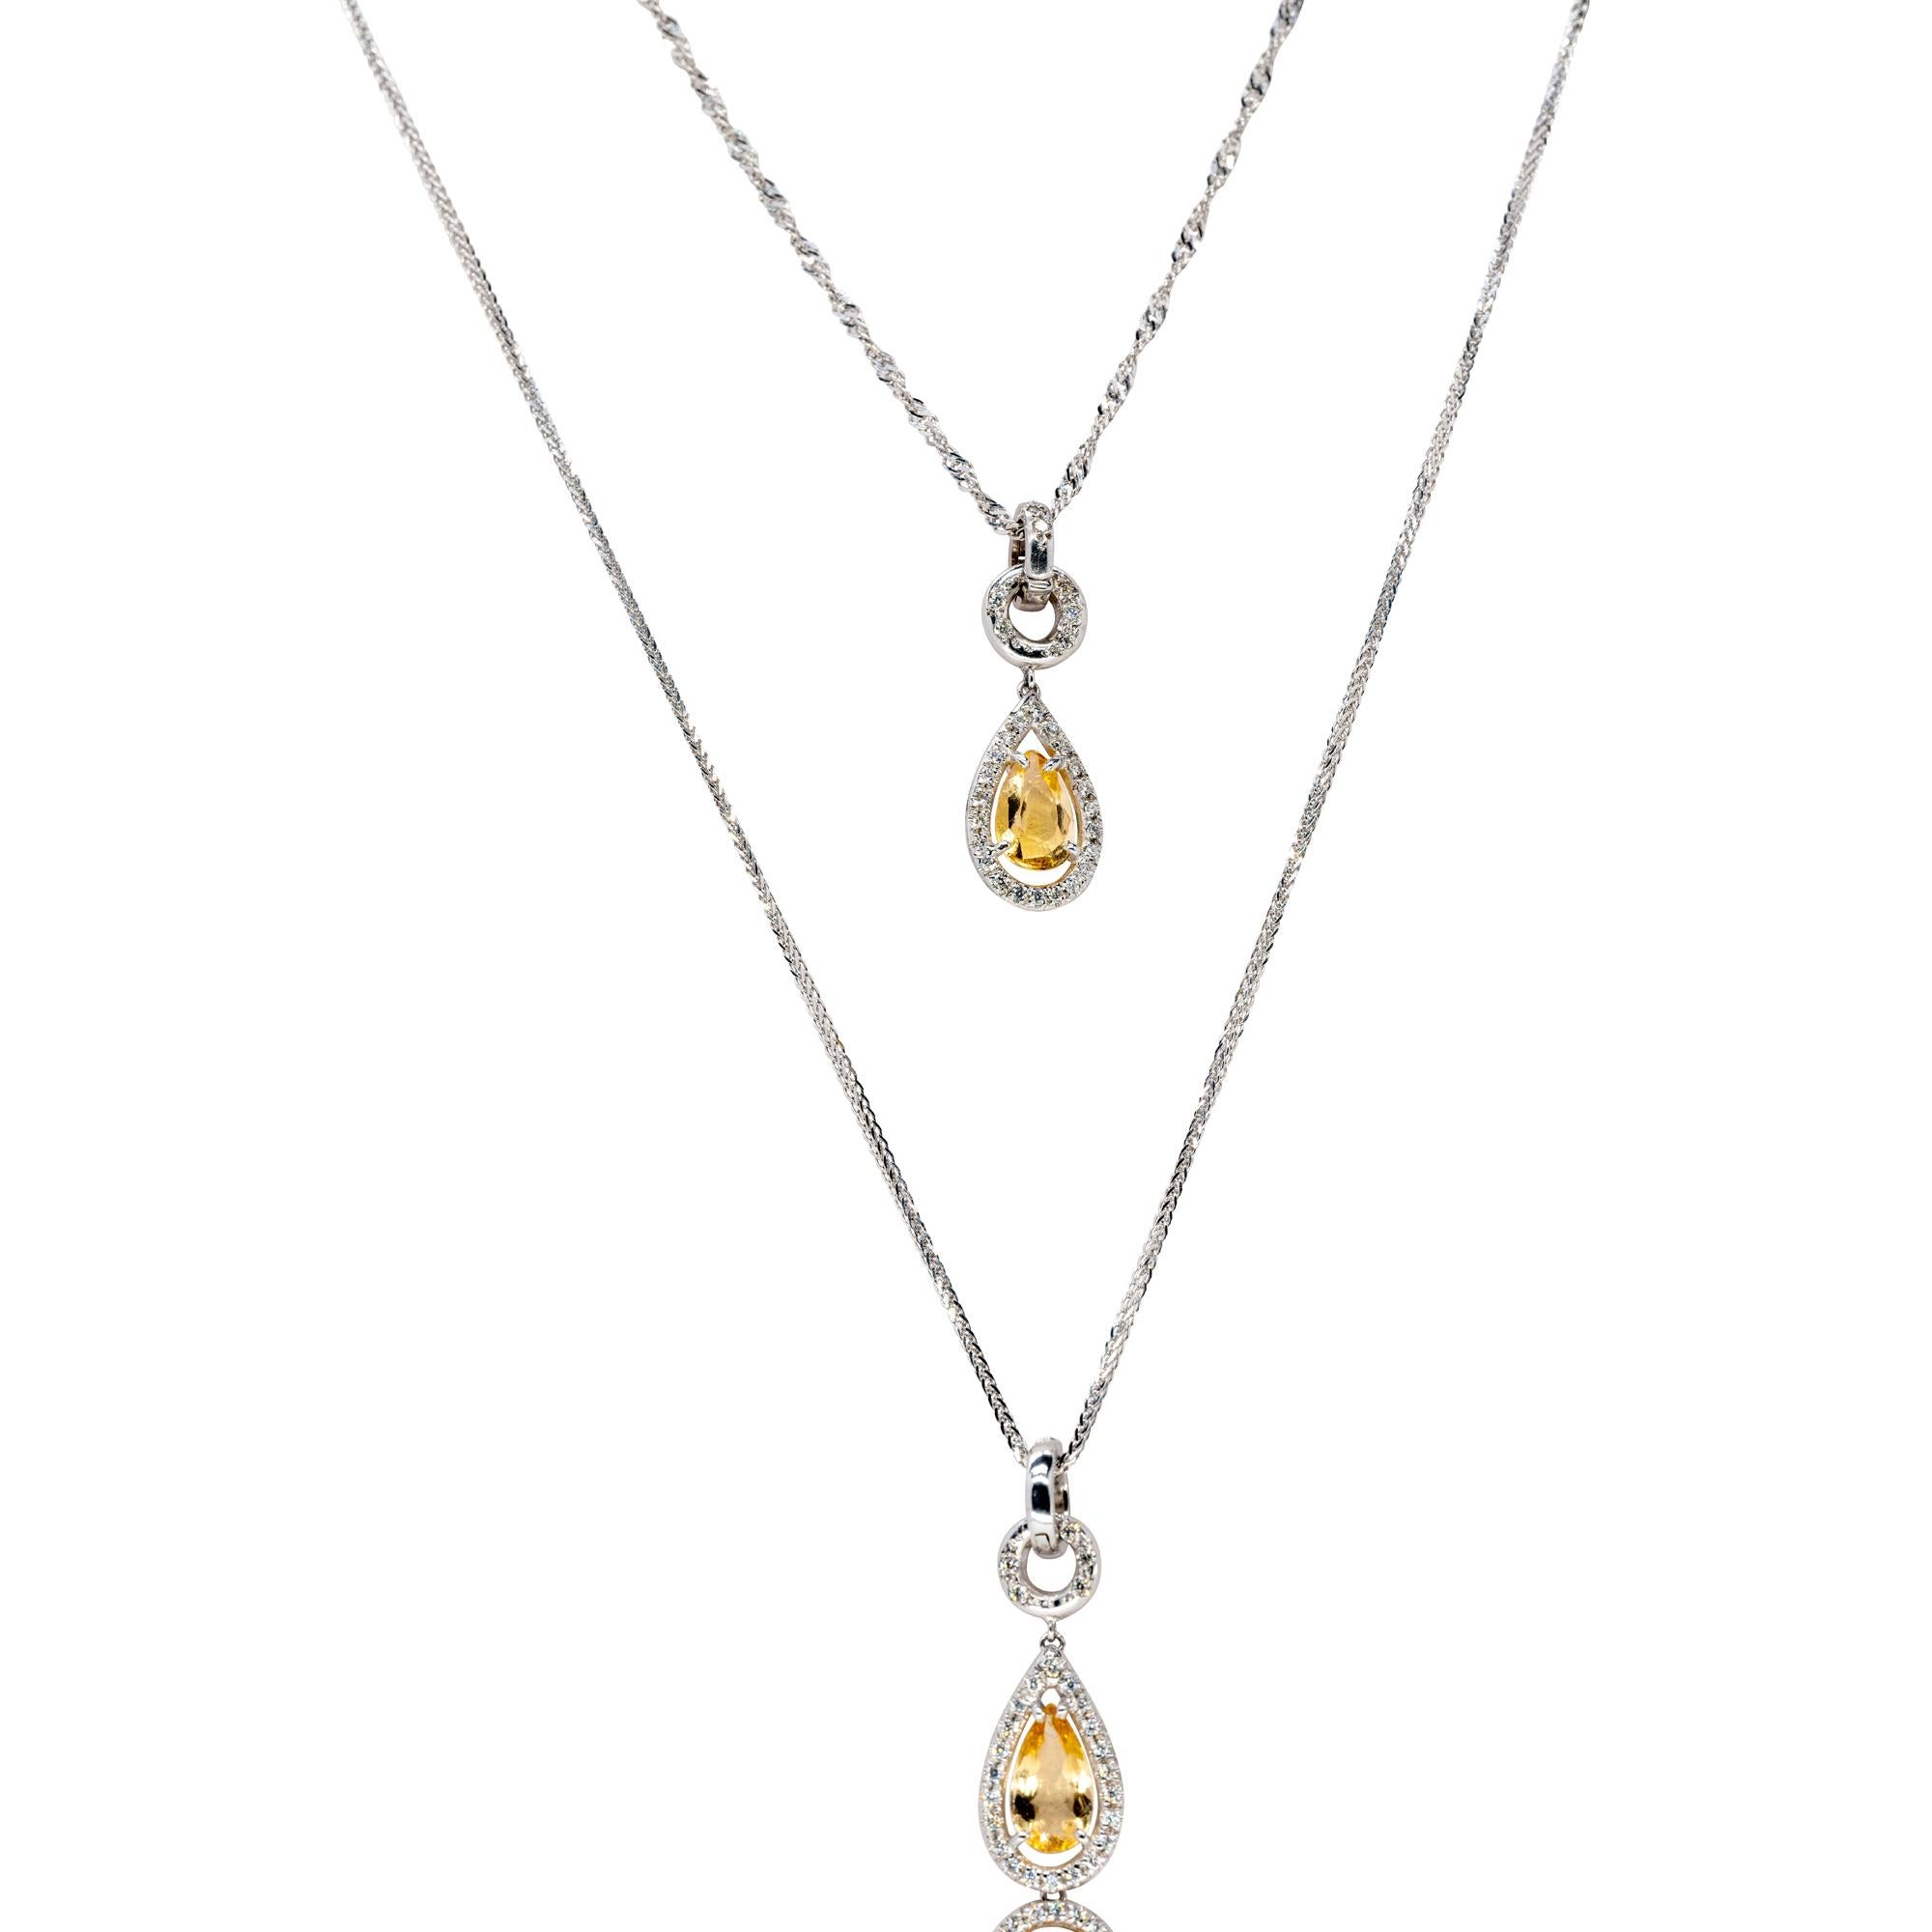 Women's Pair of d'Avossa Pendants in White Gold and Diamonds, with Imperial Topazes